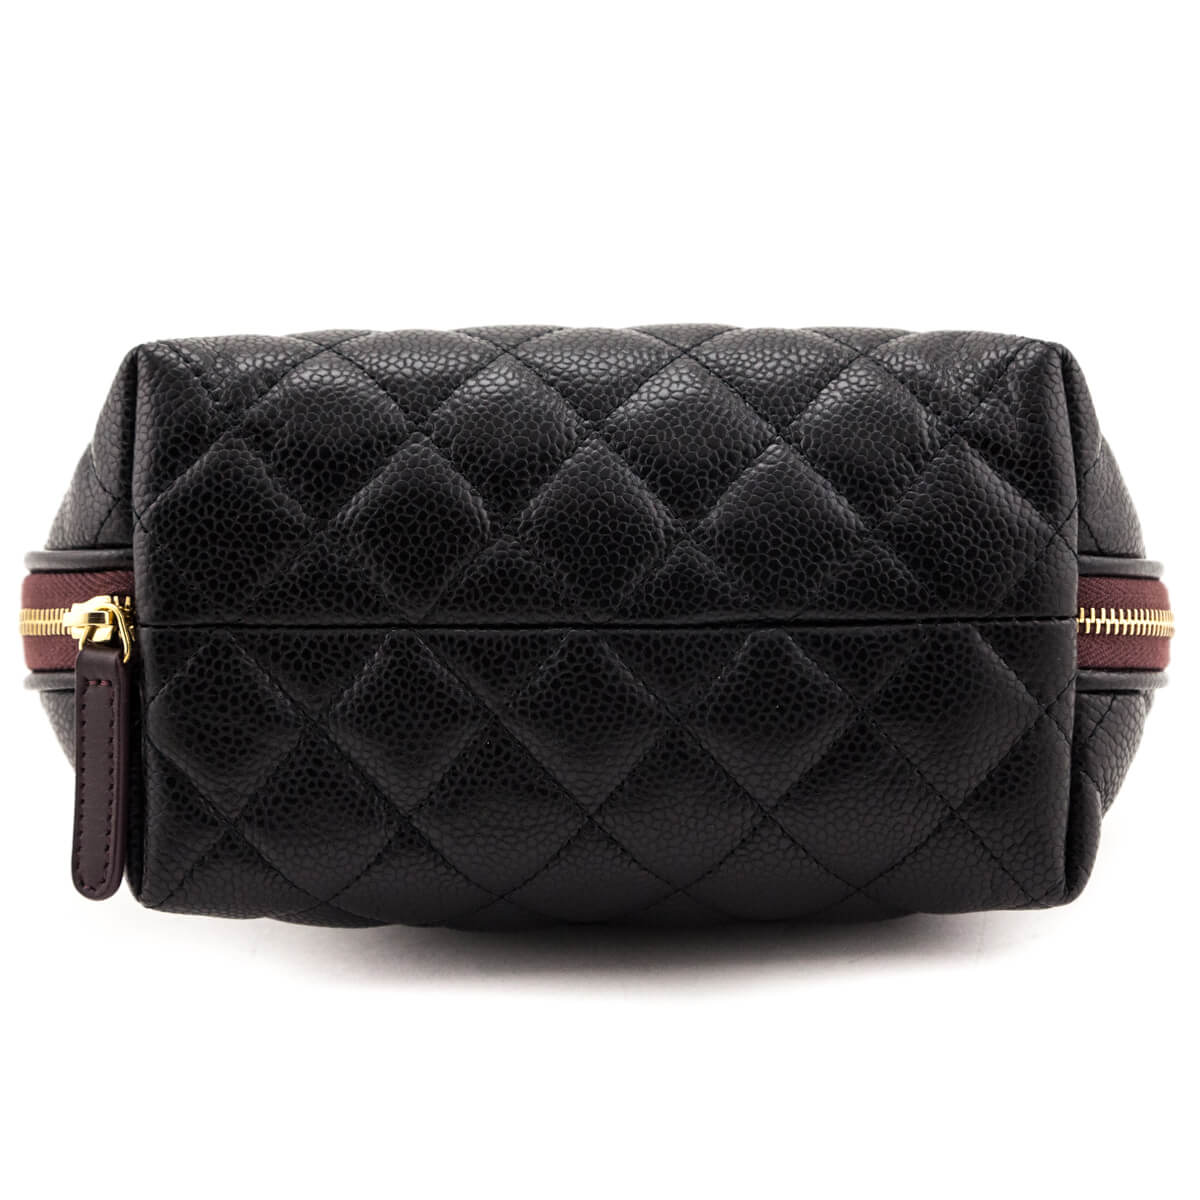 Chanel Black Caviar Small Curvy Cosmetic Case - Love that Bag etc - Preowned Authentic Designer Handbags & Preloved Fashions